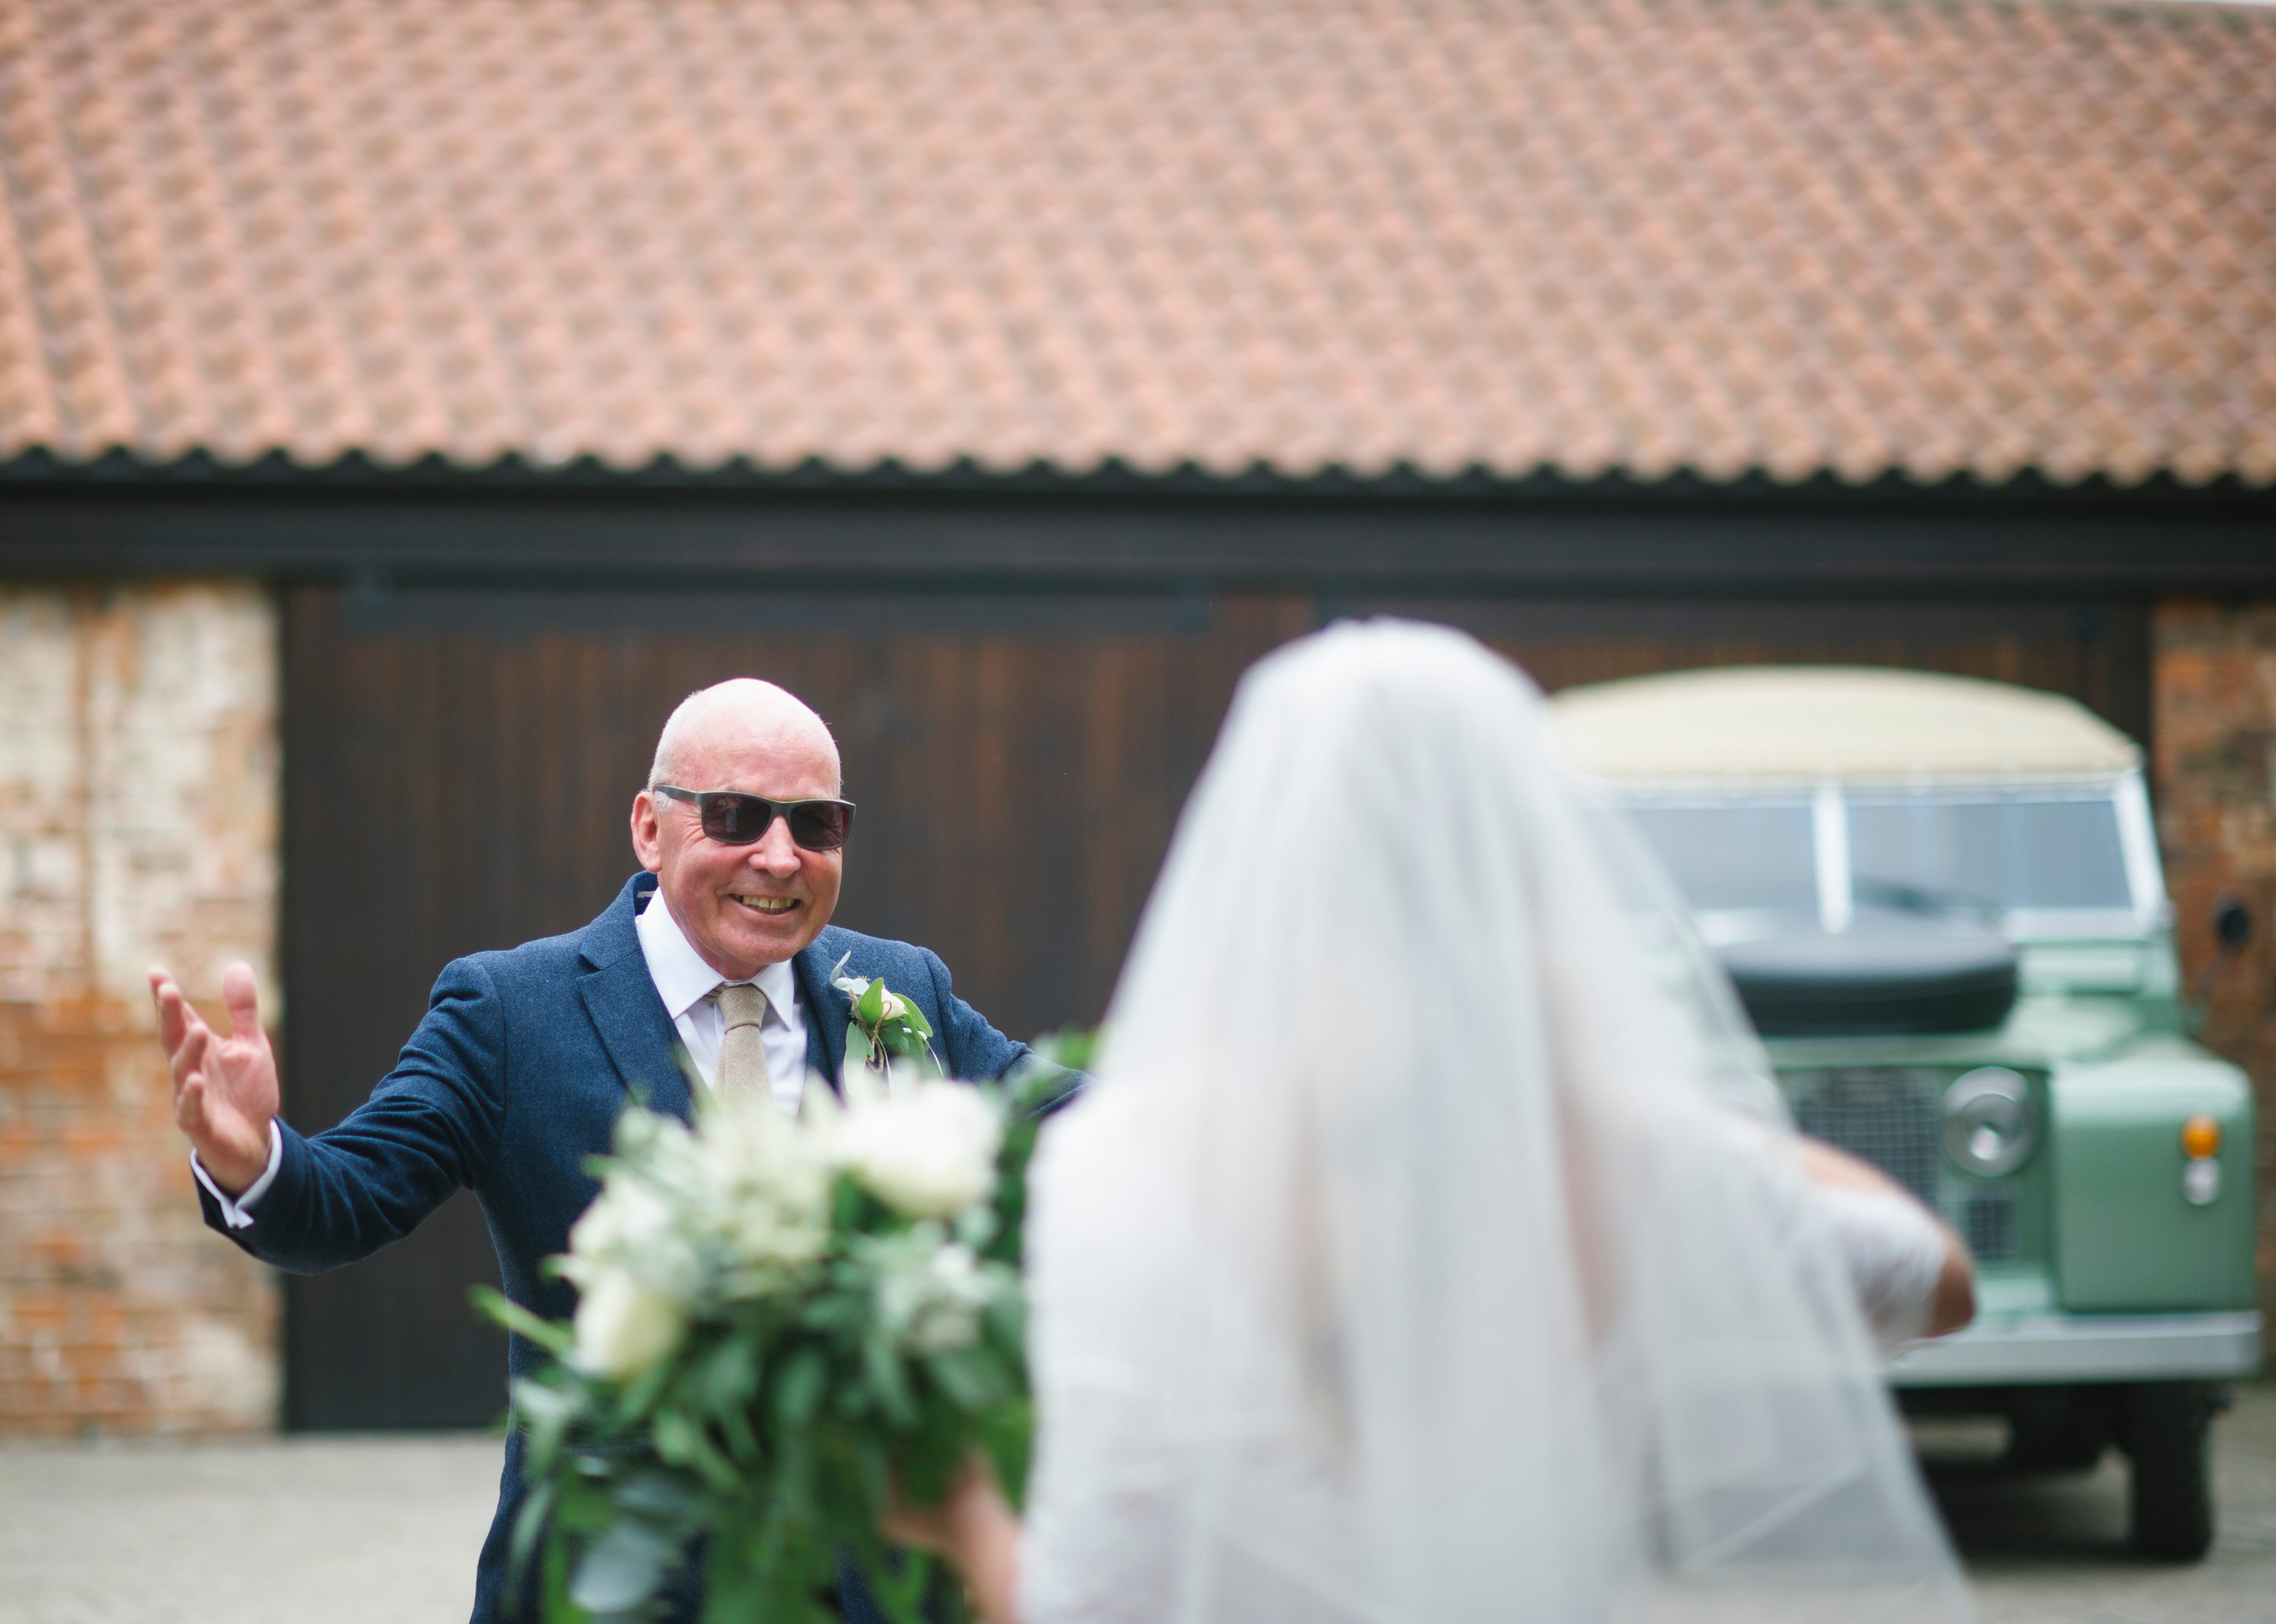 wedding photography at the normans,normans wedding photographer